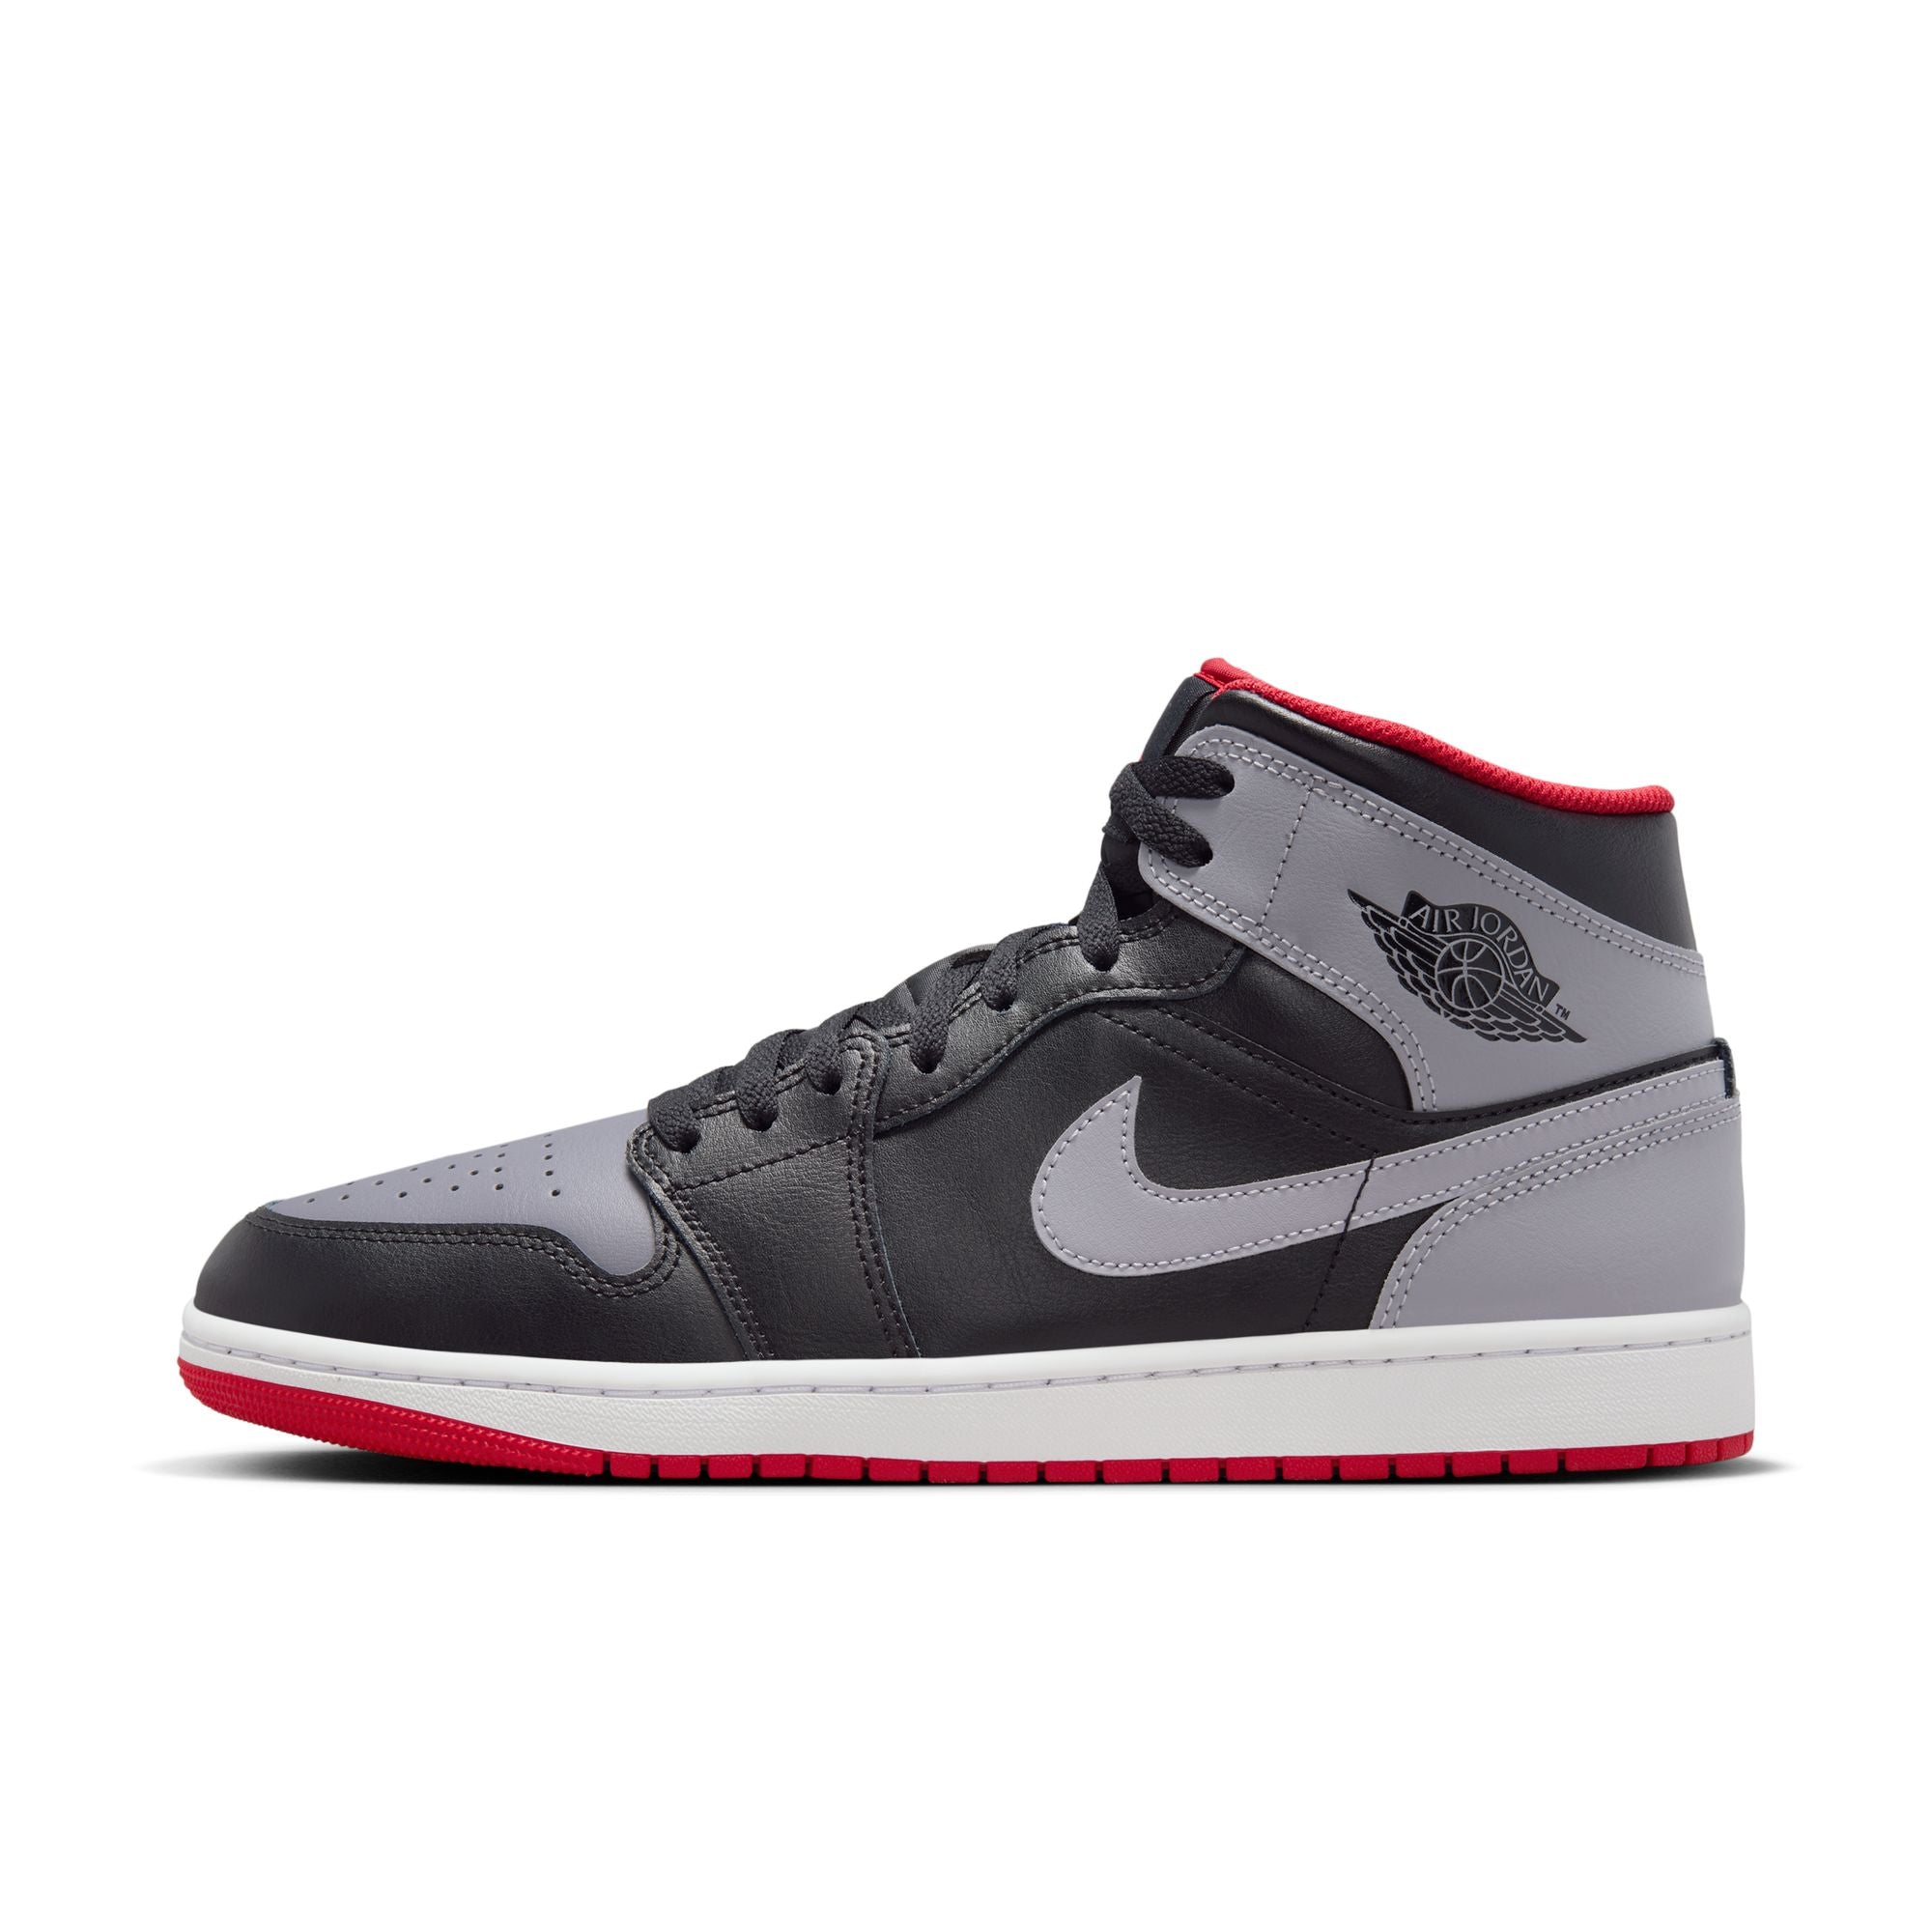 NIKE - Air Jordan 1 Mid - (Black/Cement Grey-Fire Red-Whi) view 3